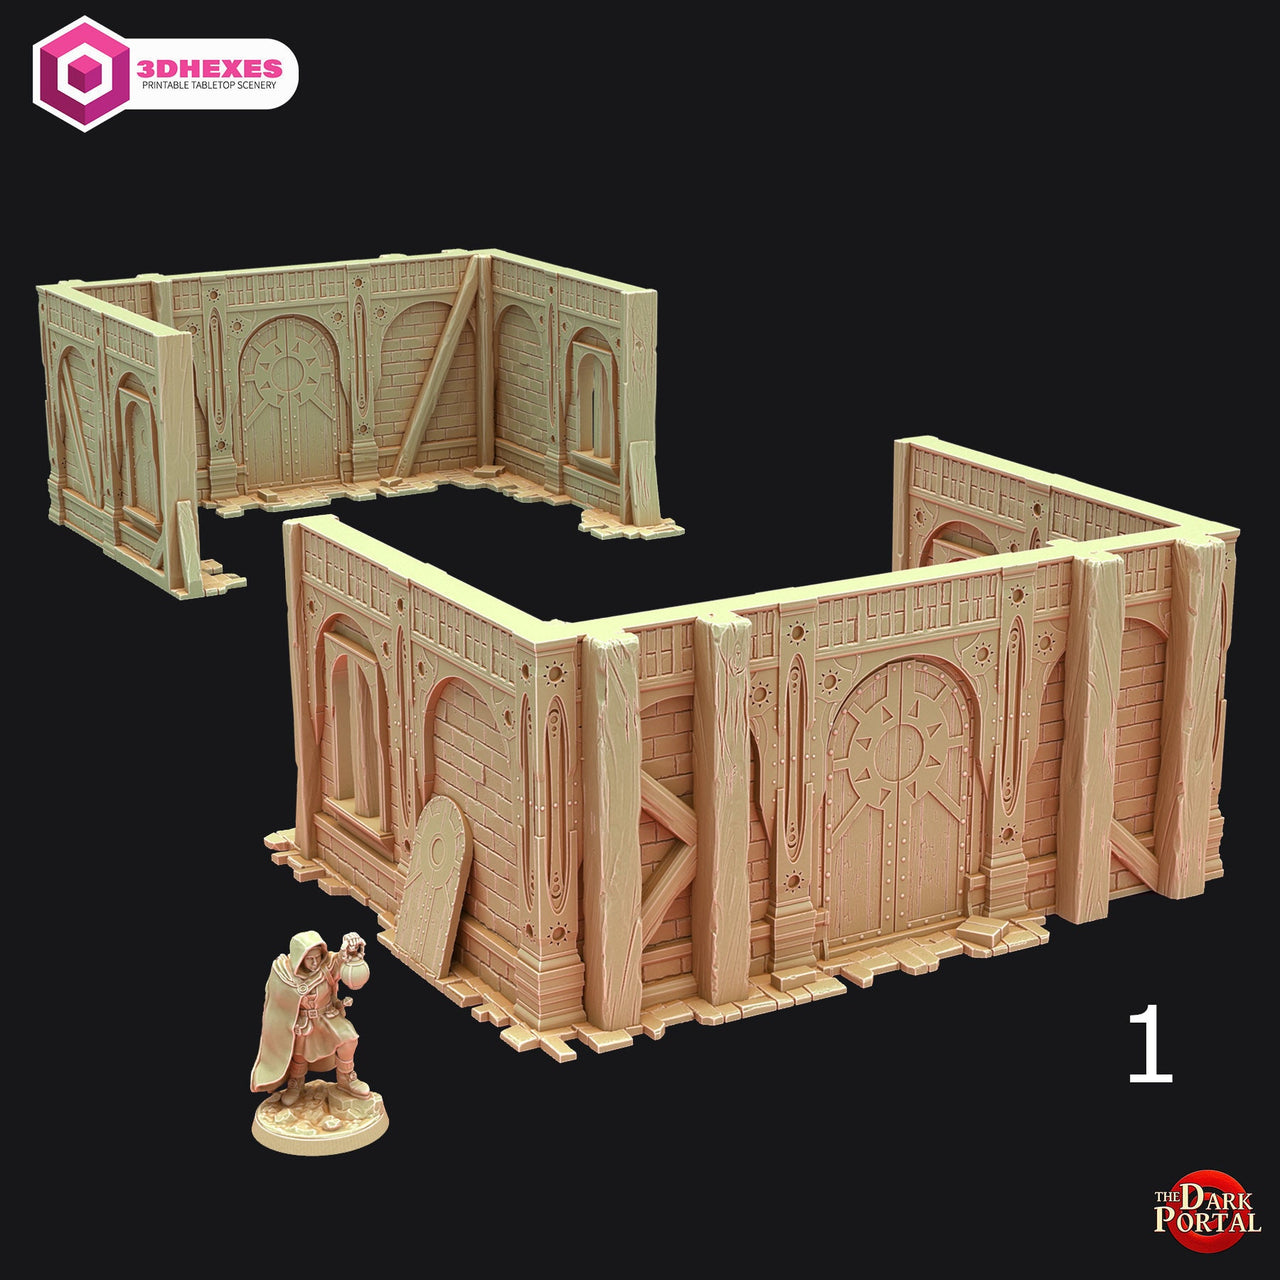 Under Construction Buildings - Echoes of the Dark Portal by 3dHexes | Ancient Ruins Terrain for Roleplaying and Gaming | Scatter